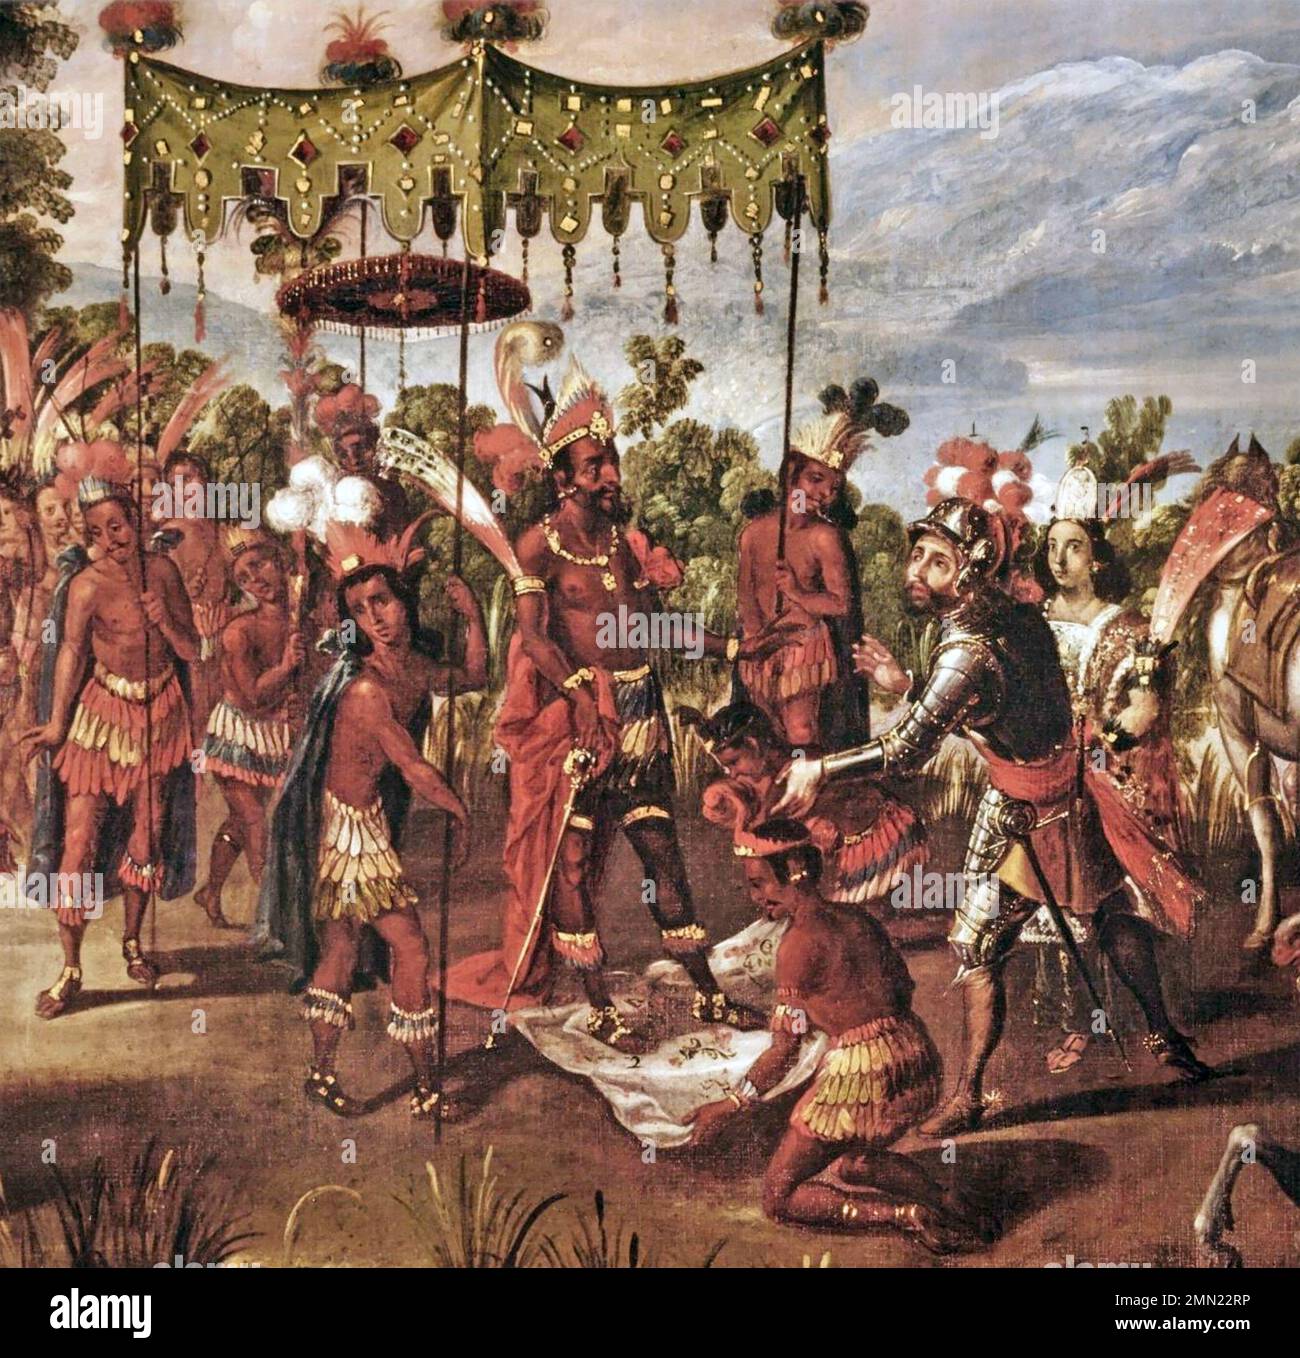 SPANISH CONQUISTADORS A 1th century painting showing the first meeting between Hernan Cortes and the Aztec ruler Moctezuma II on the shore of Lake Texcoco. Moctezuma stands on a cloth to prevent his body making contact with the earth and his entourage turn their heads from him as a sign of respect. Stock Photo